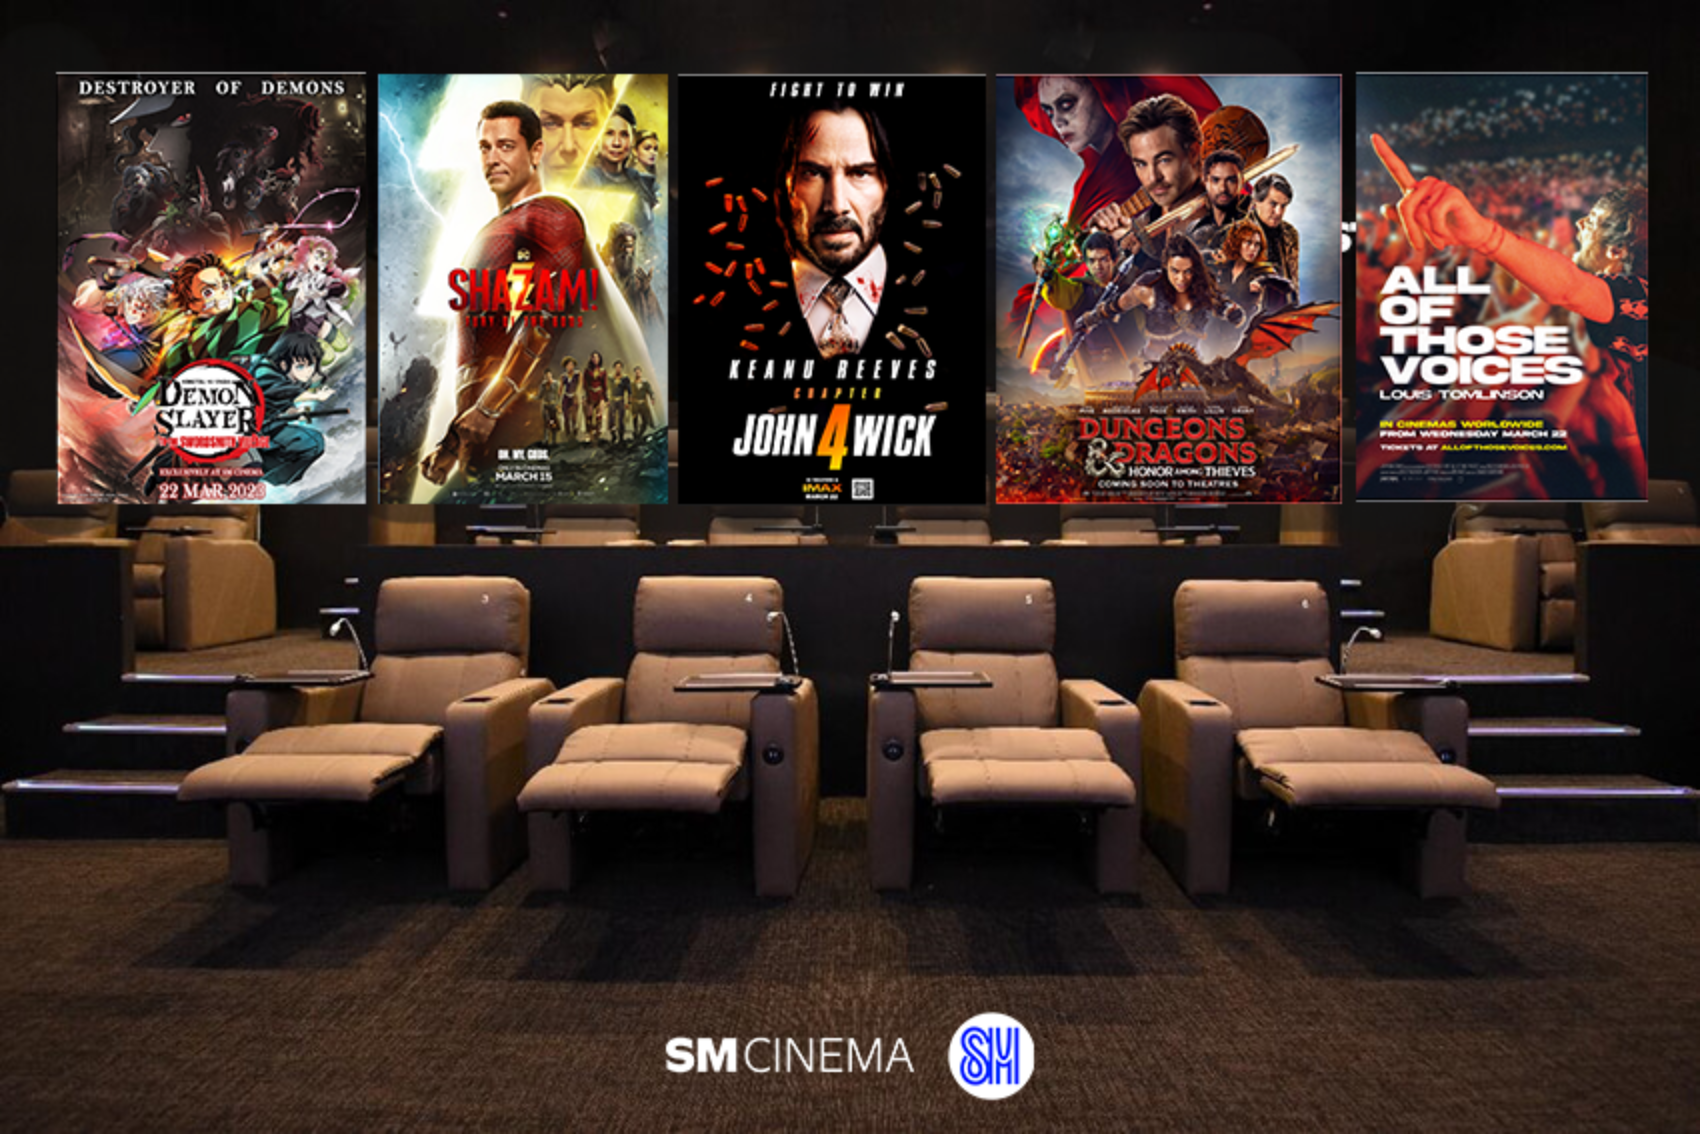 MOVIE GUIDE: March your way to SM Cinema!